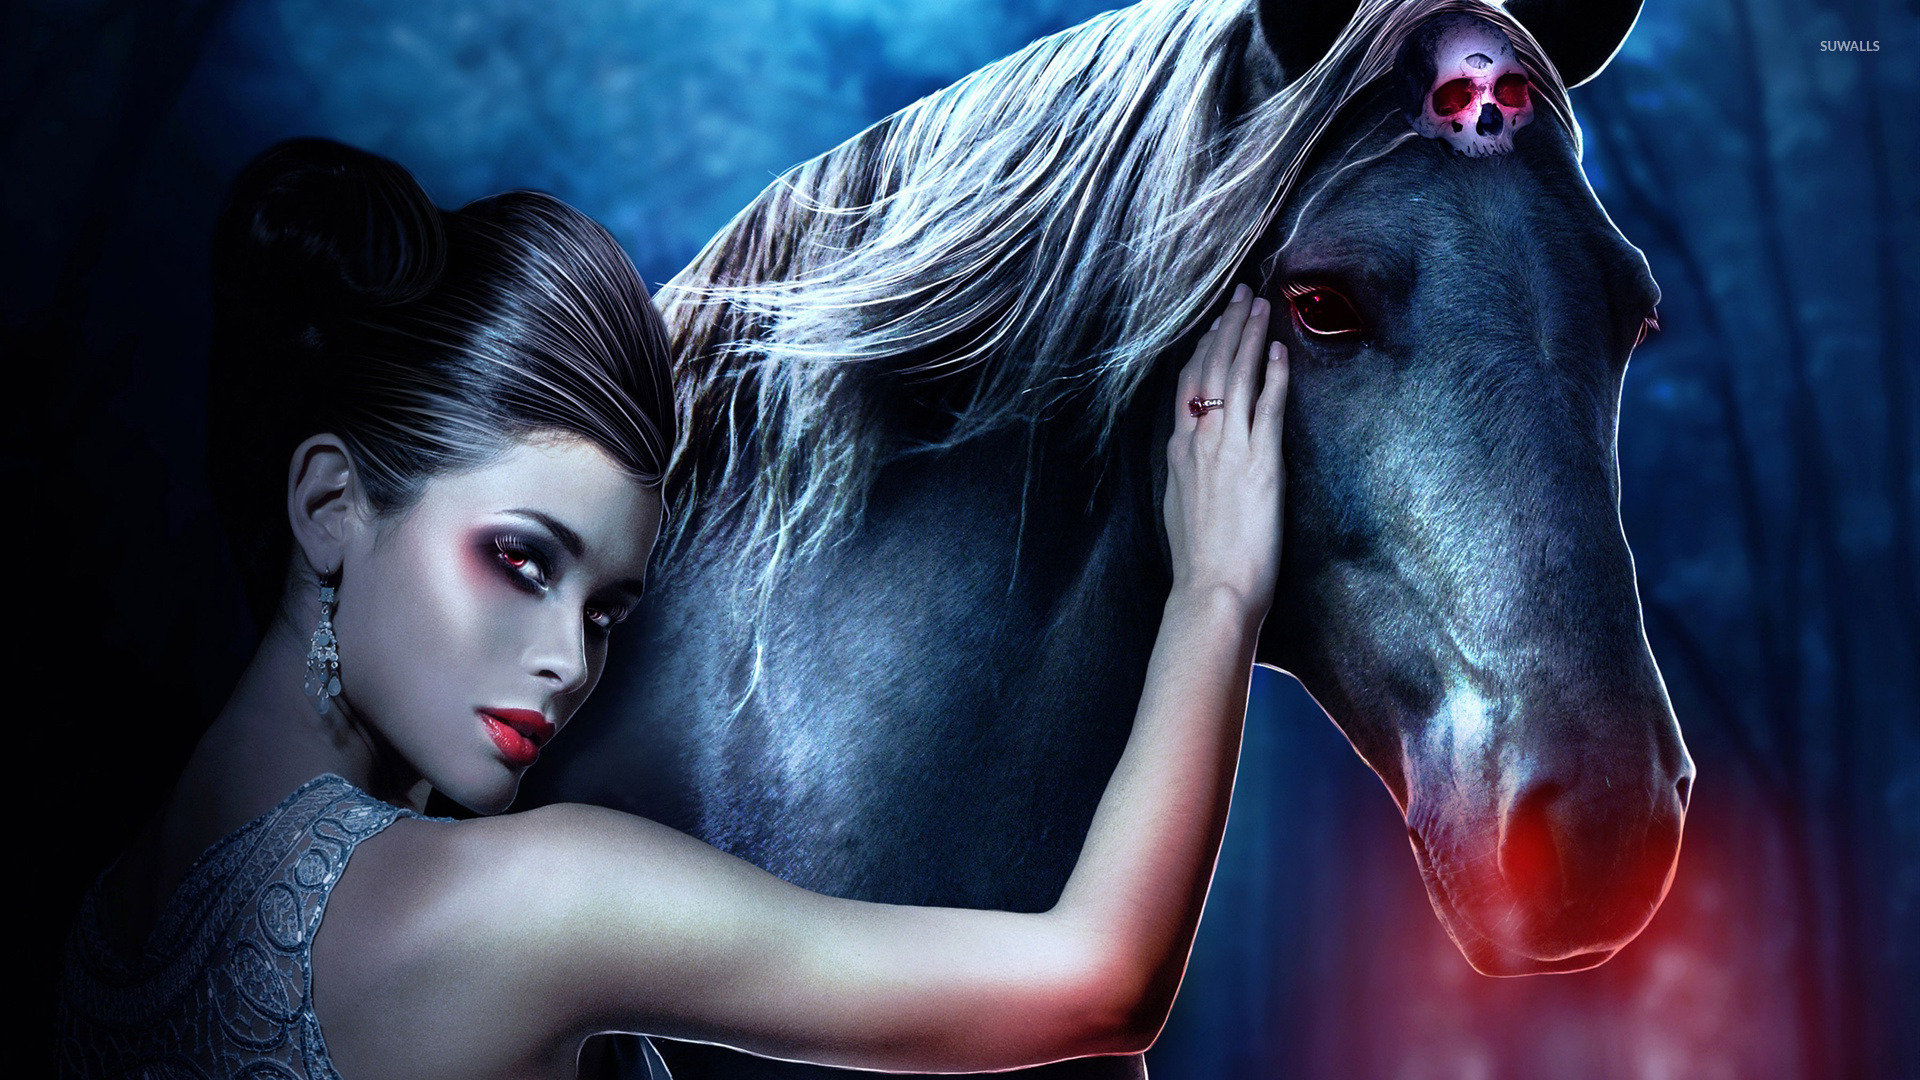 Woman with her horse wallpaper wallpaper